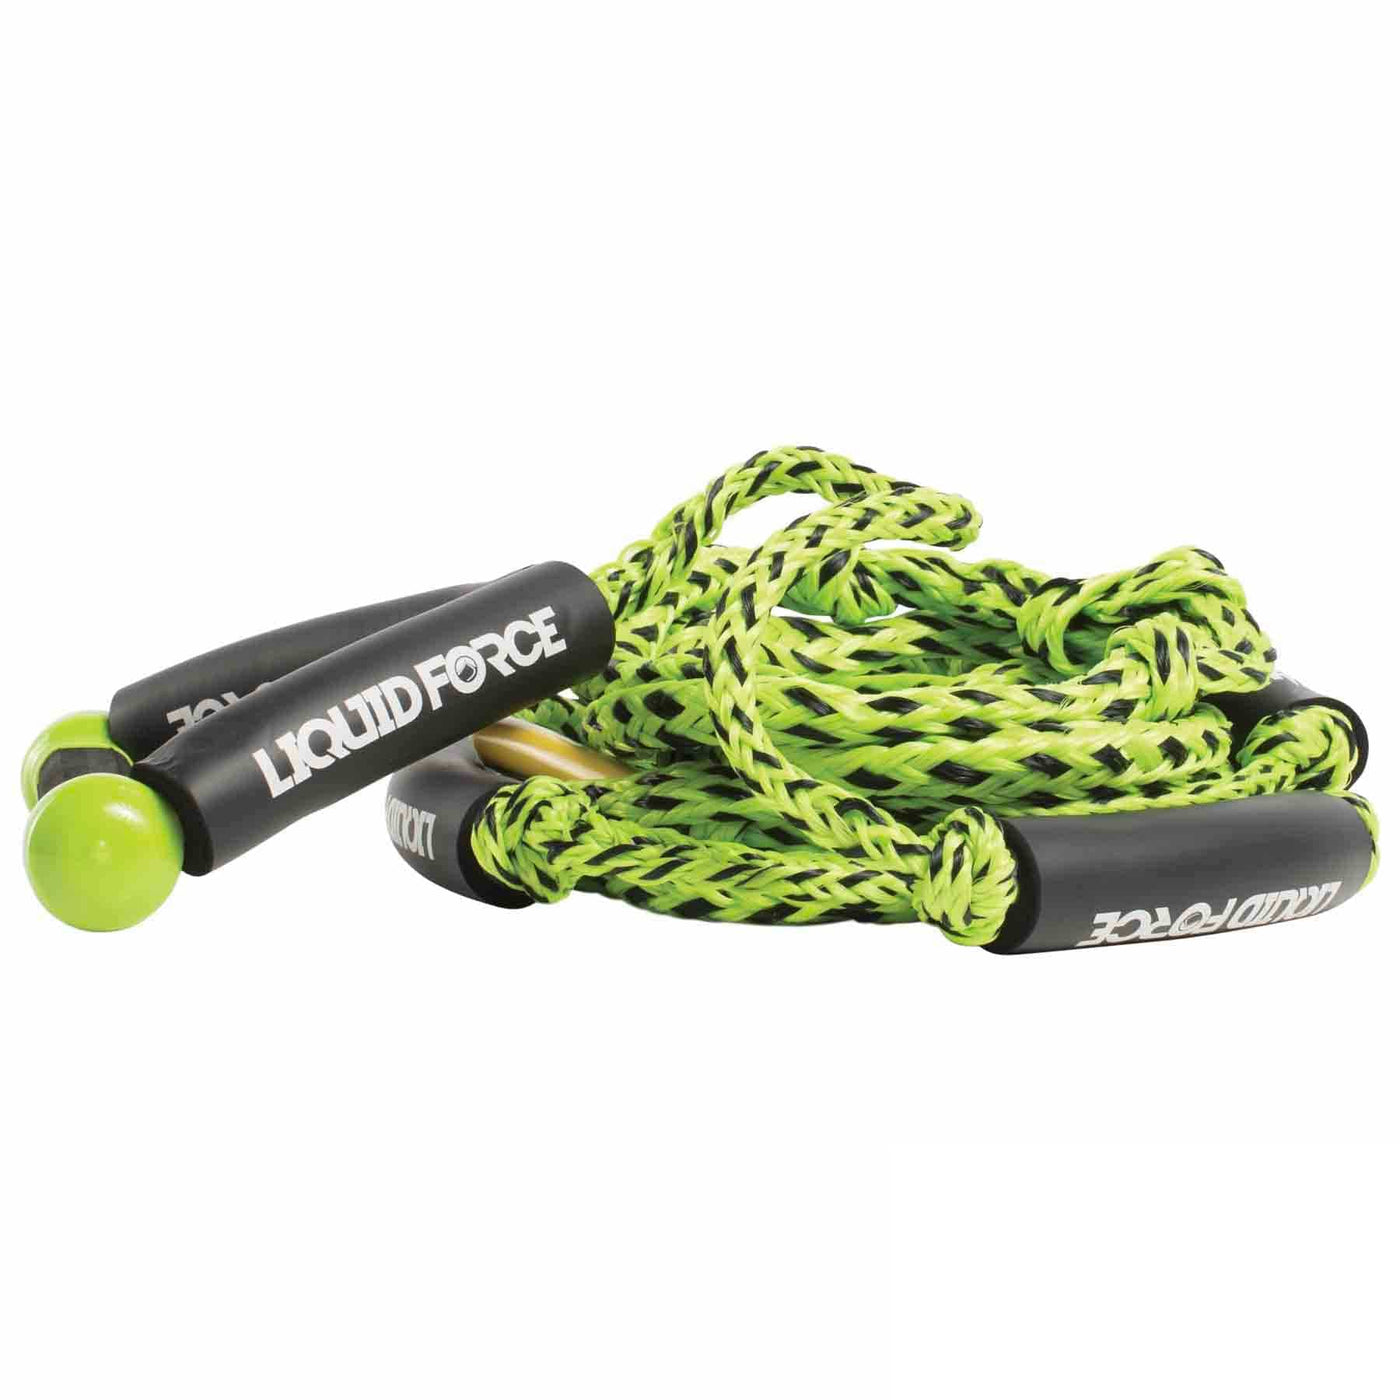 Liquid Force Surf 9" Handle Knotted Rope LIQUID FORCE